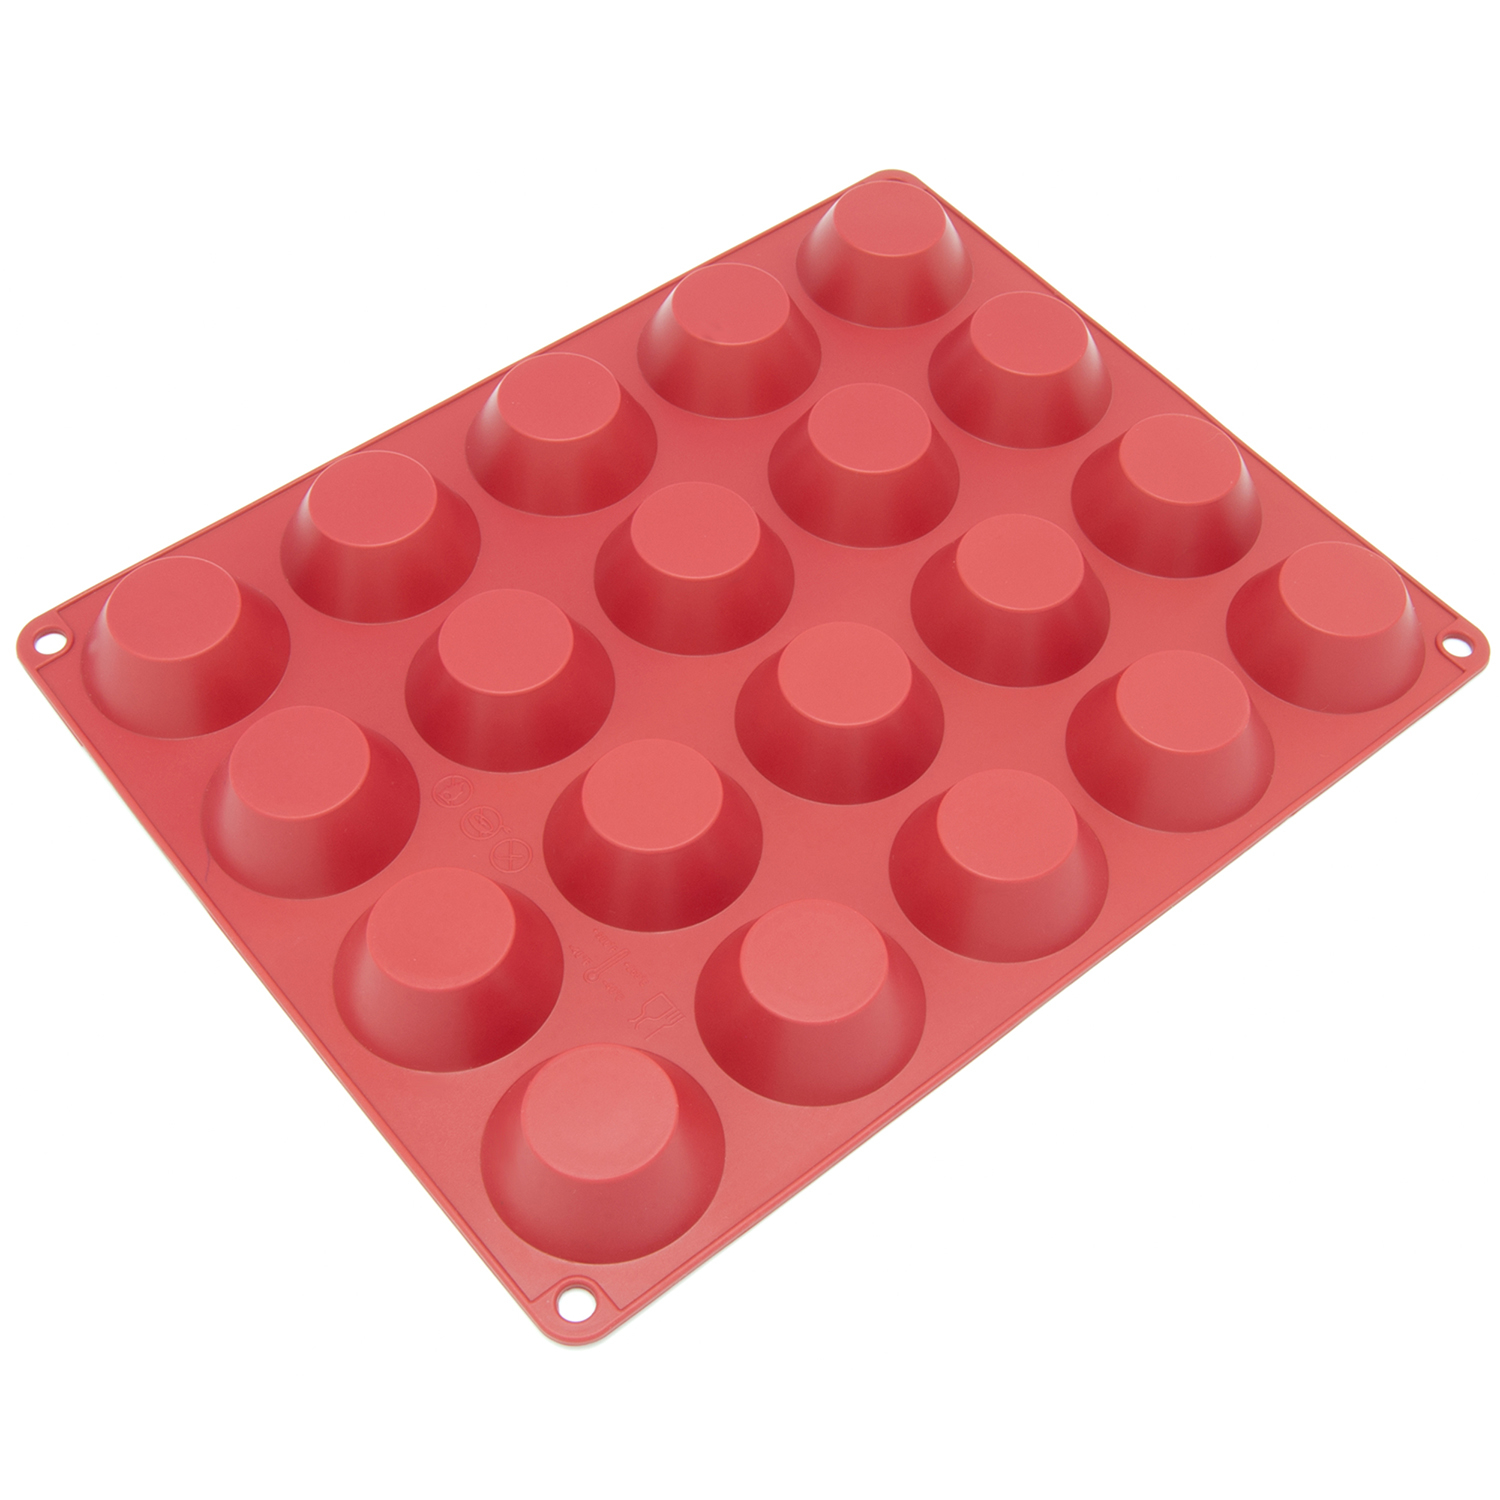 Freshware Silicone Mold for Pudding, Muffin, Cheesecake, Custard and Tart, 20-Cavity